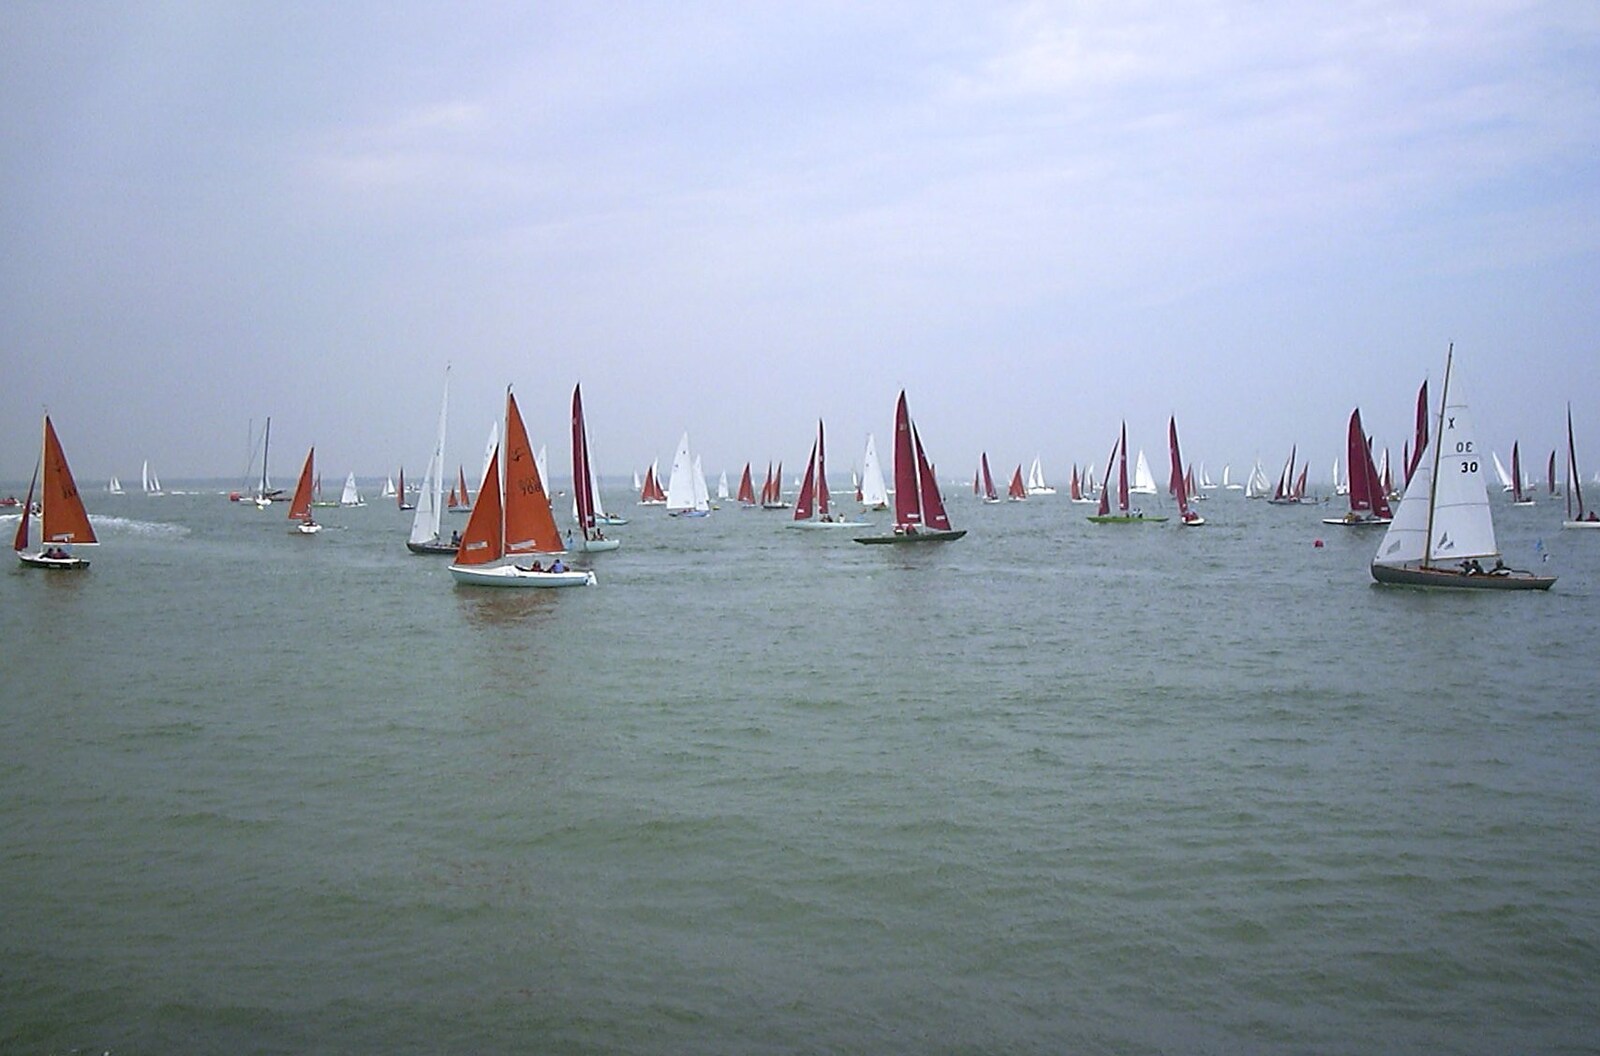 A mixture of Squibs and Redwings from Cowes Weekend, Cowes, Isle of Wight - 7th August 2004